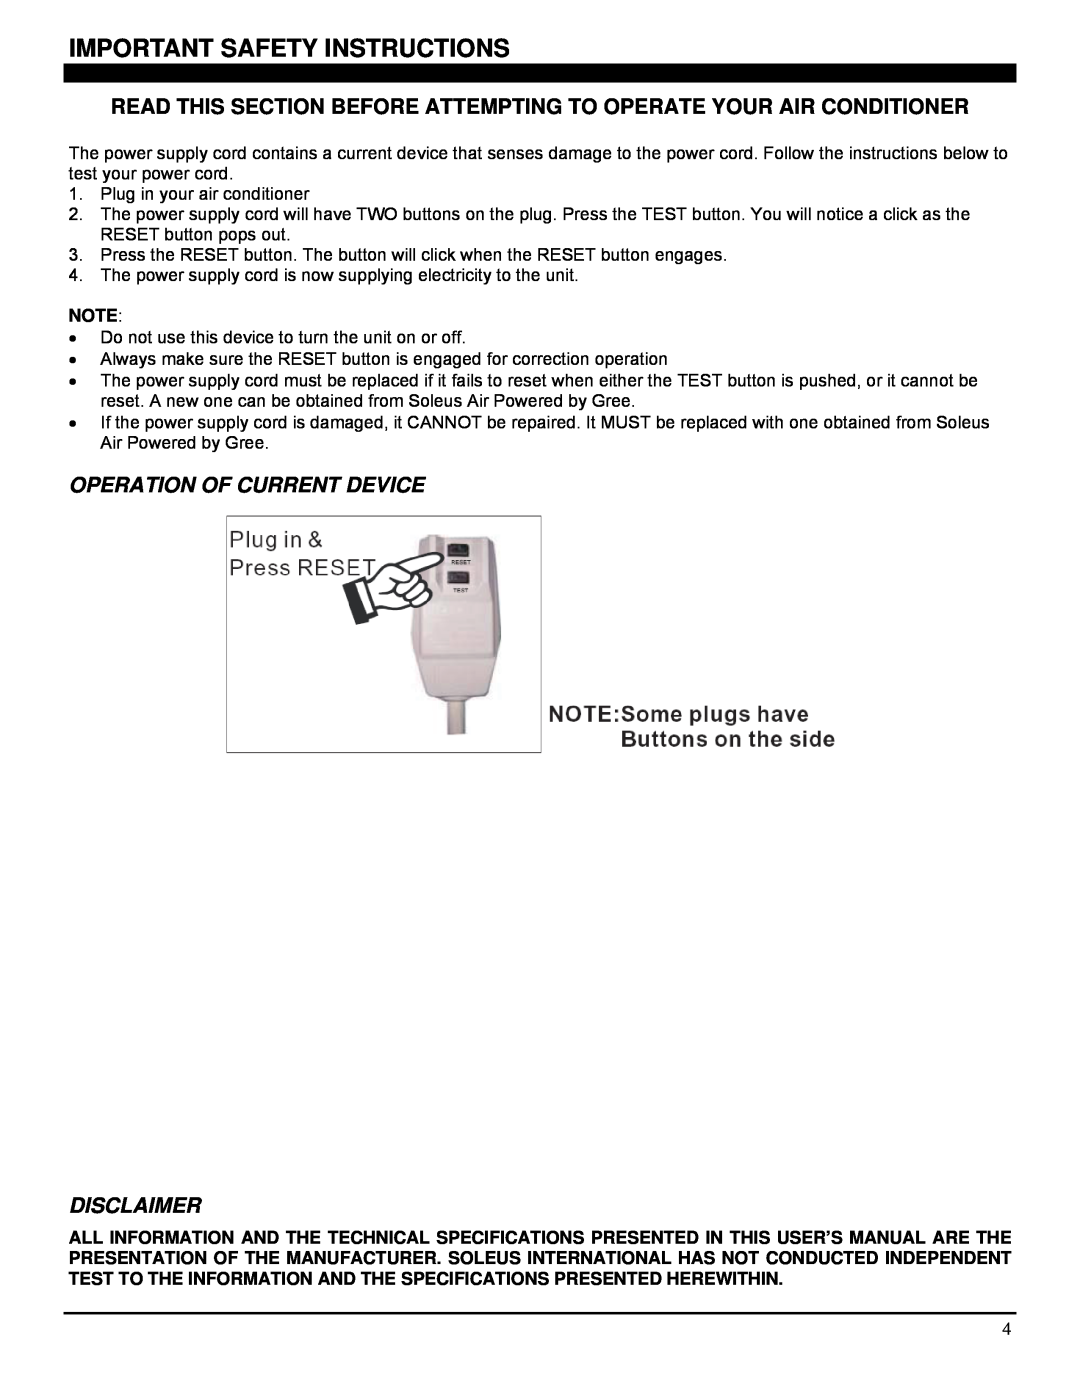 Soleus Air SG-TTW-12ESE operating instructions Important Safety Instructions, Operation Of Current Device Disclaimer 